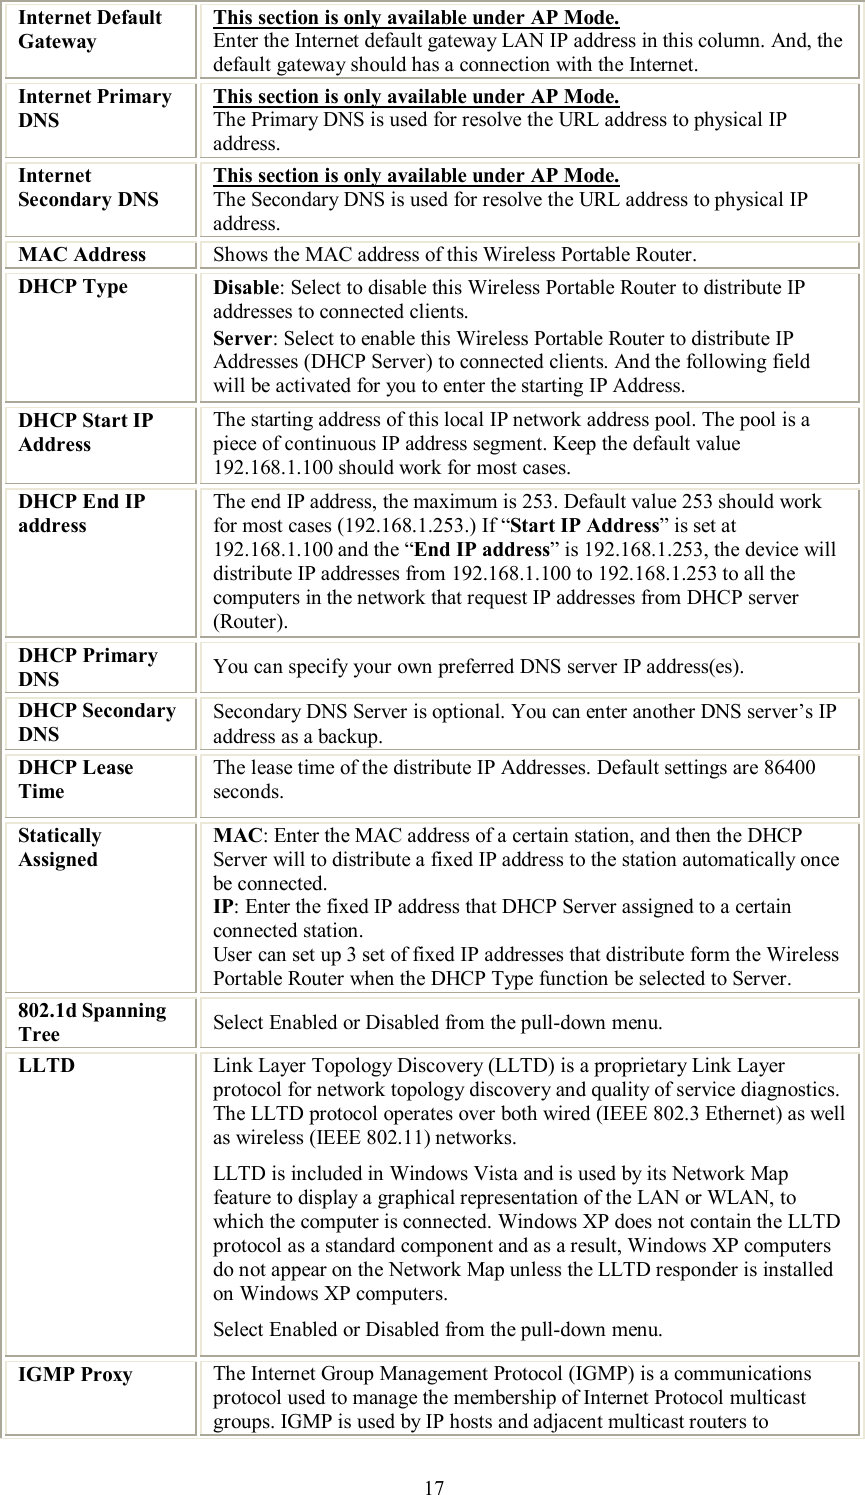    17 Internet Default Gateway This section is only available under AP Mode. Enter the Internet default gateway LAN IP address in this column. And, the default gateway should has a connection with the Internet. Internet Primary DNS This section is only available under AP Mode. The Primary DNS is used for resolve the URL address to physical IP address.  Internet Secondary DNS This section is only available under AP Mode. The Secondary DNS is used for resolve the URL address to physical IP address. MAC Address  Shows the MAC address of this Wireless Portable Router. DHCP Type  Disable: Select to disable this Wireless Portable Router to distribute IP addresses to connected clients. Server: Select to enable this Wireless Portable Router to distribute IP Addresses (DHCP Server) to connected clients. And the following field will be activated for you to enter the starting IP Address. DHCP Start IP Address The starting address of this local IP network address pool. The pool is a piece of continuous IP address segment. Keep the default value 192.168.1.100 should work for most cases. DHCP End IP address The end IP address, the maximum is 253. Default value 253 should work for most cases (192.168.1.253.) If “Start IP Address” is set at 192.168.1.100 and the “End IP address” is 192.168.1.253, the device will distribute IP addresses from 192.168.1.100 to 192.168.1.253 to all the computers in the network that request IP addresses from DHCP server (Router). DHCP Primary DNS  You can specify your own preferred DNS server IP address(es).  DHCP Secondary DNS Secondary DNS Server is optional. You can enter another DNS server’s IP address as a backup. DHCP Lease Time The lease time of the distribute IP Addresses. Default settings are 86400 seconds. Statically Assigned MAC: Enter the MAC address of a certain station, and then the DHCP Server will to distribute a fixed IP address to the station automatically once be connected. IP: Enter the fixed IP address that DHCP Server assigned to a certain connected station.  User can set up 3 set of fixed IP addresses that distribute form the Wireless Portable Router when the DHCP Type function be selected to Server. 802.1d Spanning Tree  Select Enabled or Disabled from the pull-down menu. LLTD  Link Layer Topology Discovery (LLTD) is a proprietary Link Layer protocol for network topology discovery and quality of service diagnostics. The LLTD protocol operates over both wired (IEEE 802.3 Ethernet) as well as wireless (IEEE 802.11) networks. LLTD is included in Windows Vista and is used by its Network Map feature to display a graphical representation of the LAN or WLAN, to which the computer is connected. Windows XP does not contain the LLTD protocol as a standard component and as a result, Windows XP computers do not appear on the Network Map unless the LLTD responder is installed on Windows XP computers. Select Enabled or Disabled from the pull-down menu. IGMP Proxy  The Internet Group Management Protocol (IGMP) is a communications protocol used to manage the membership of Internet Protocol multicast groups. IGMP is used by IP hosts and adjacent multicast routers to 